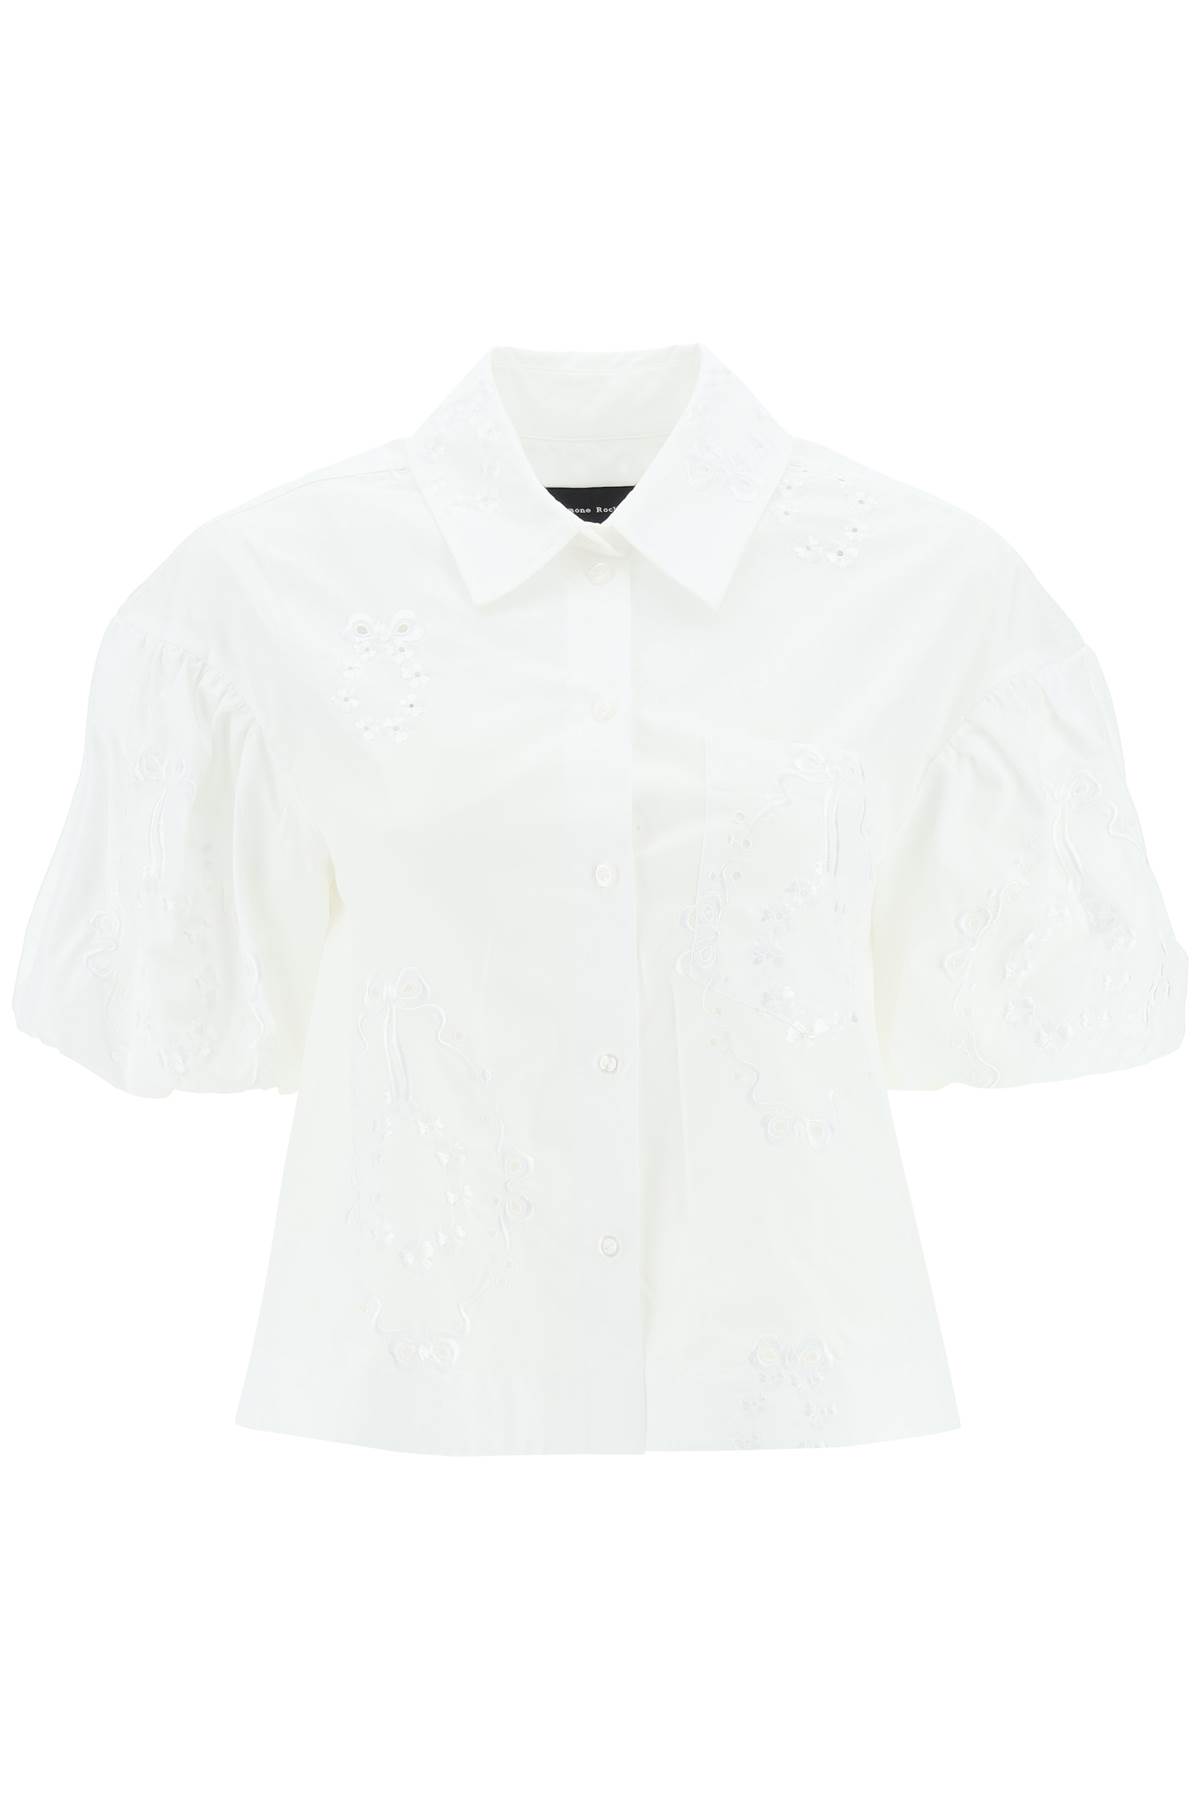 SIMONE ROCHA CROPPED SHIRT WITH EMBRODERED TRIM